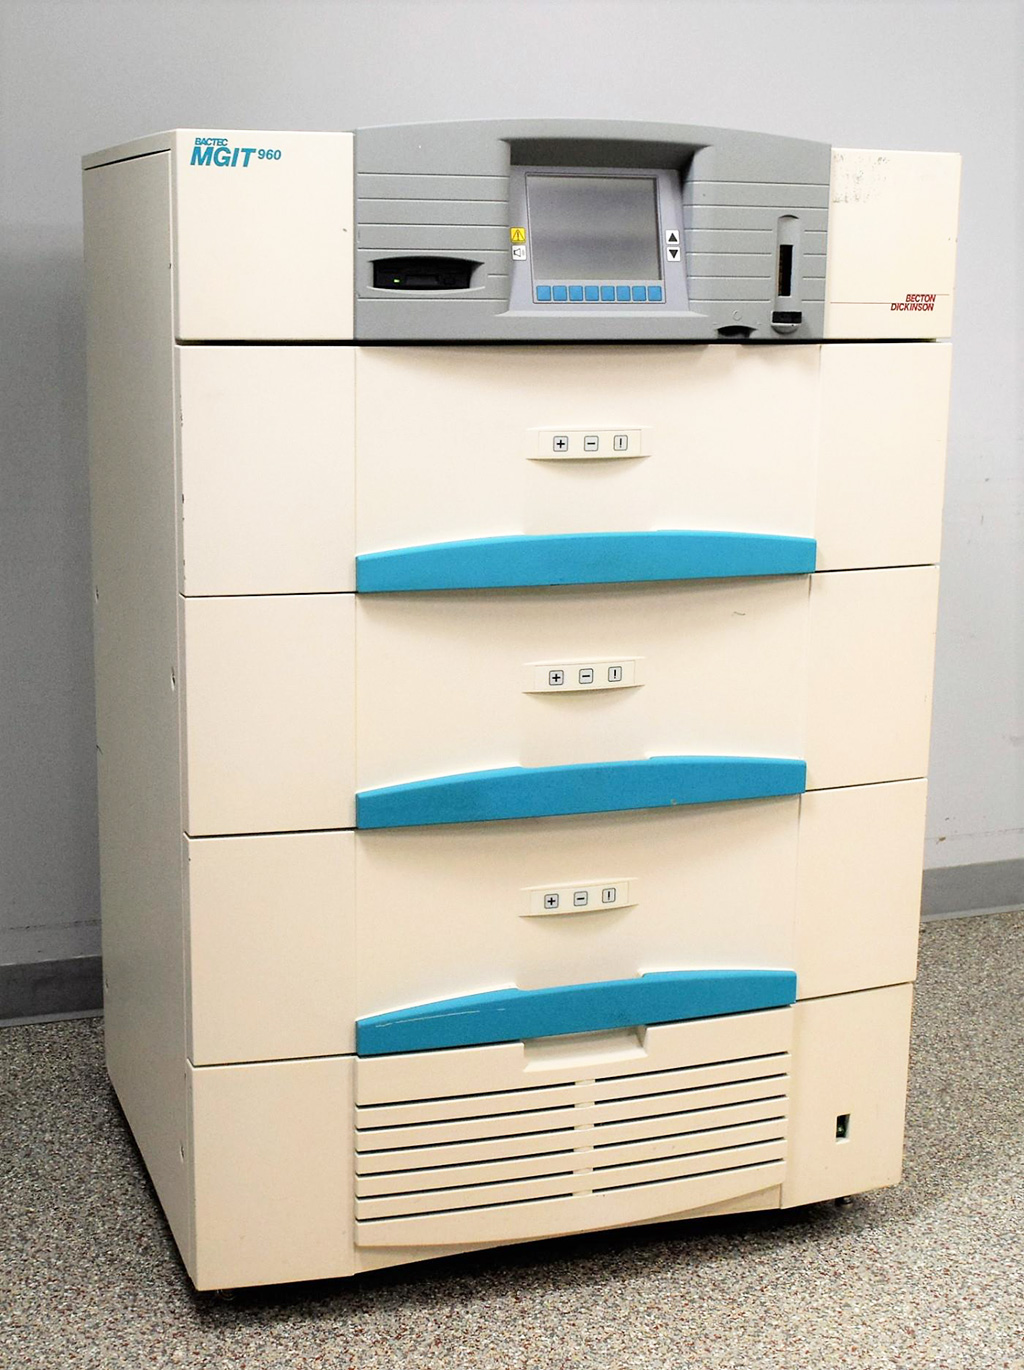 Image: The BD BACTEC MGIT 960 automated mycobacterial detection system is a...